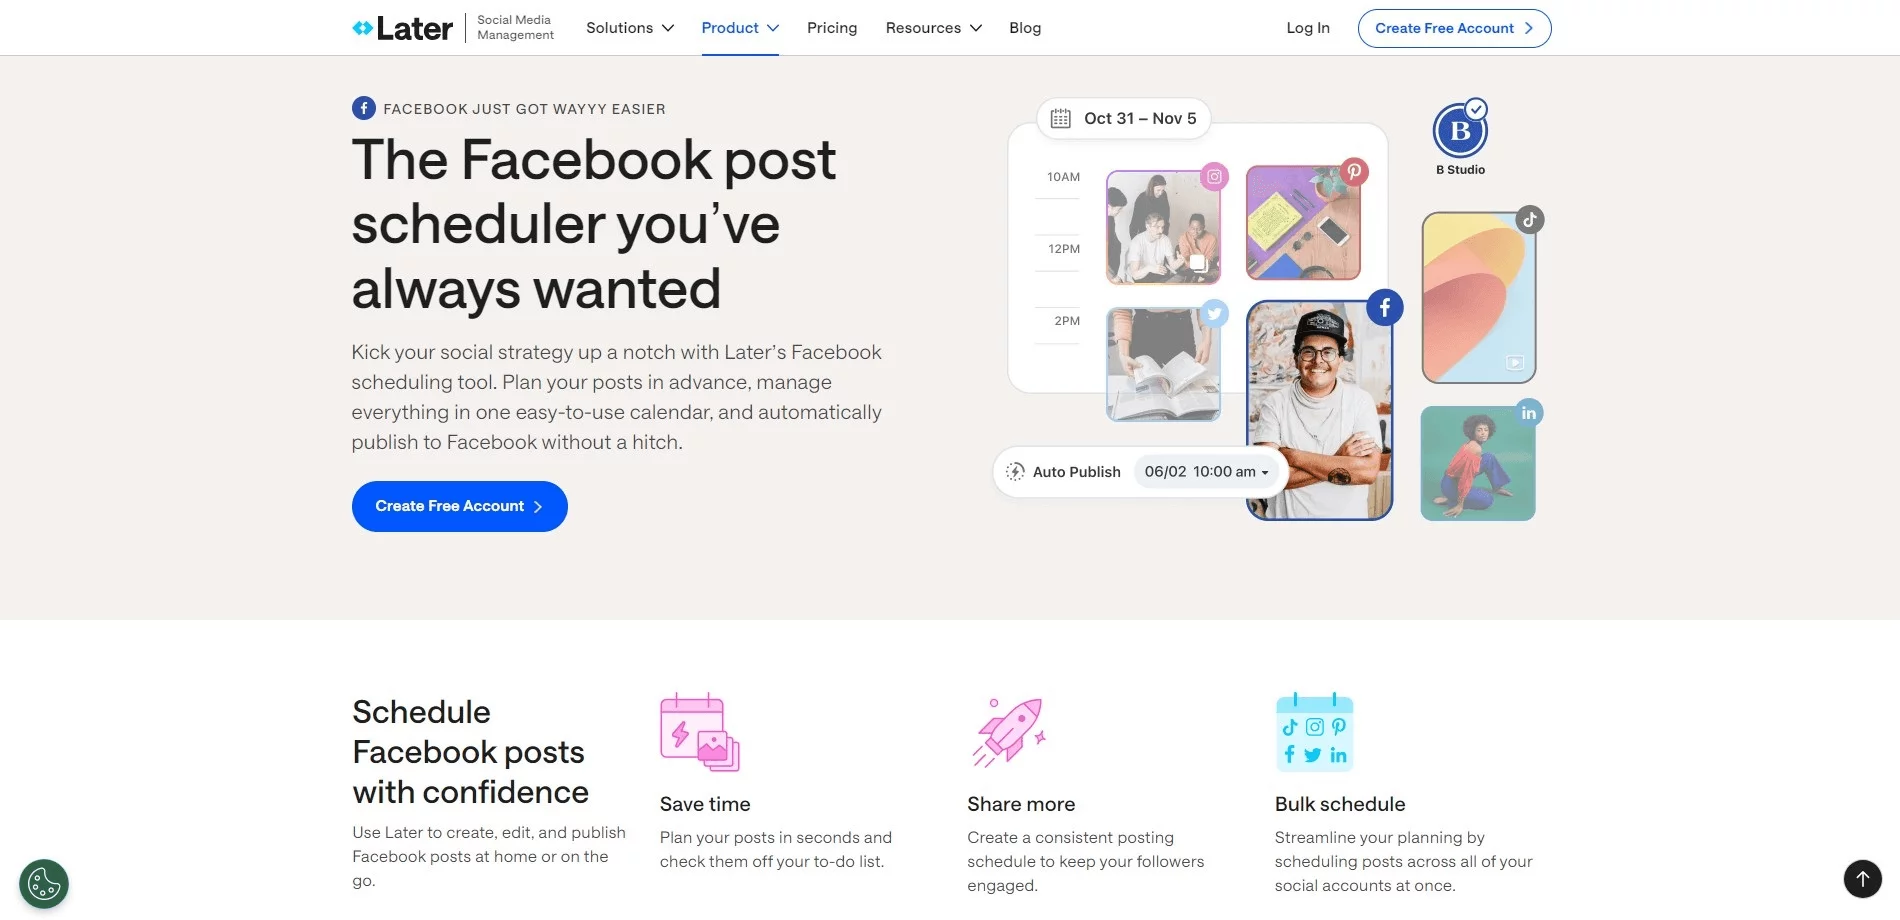 Later's website page featuring their Facebook post scheduler tool with images of scheduled posts on various social platforms.